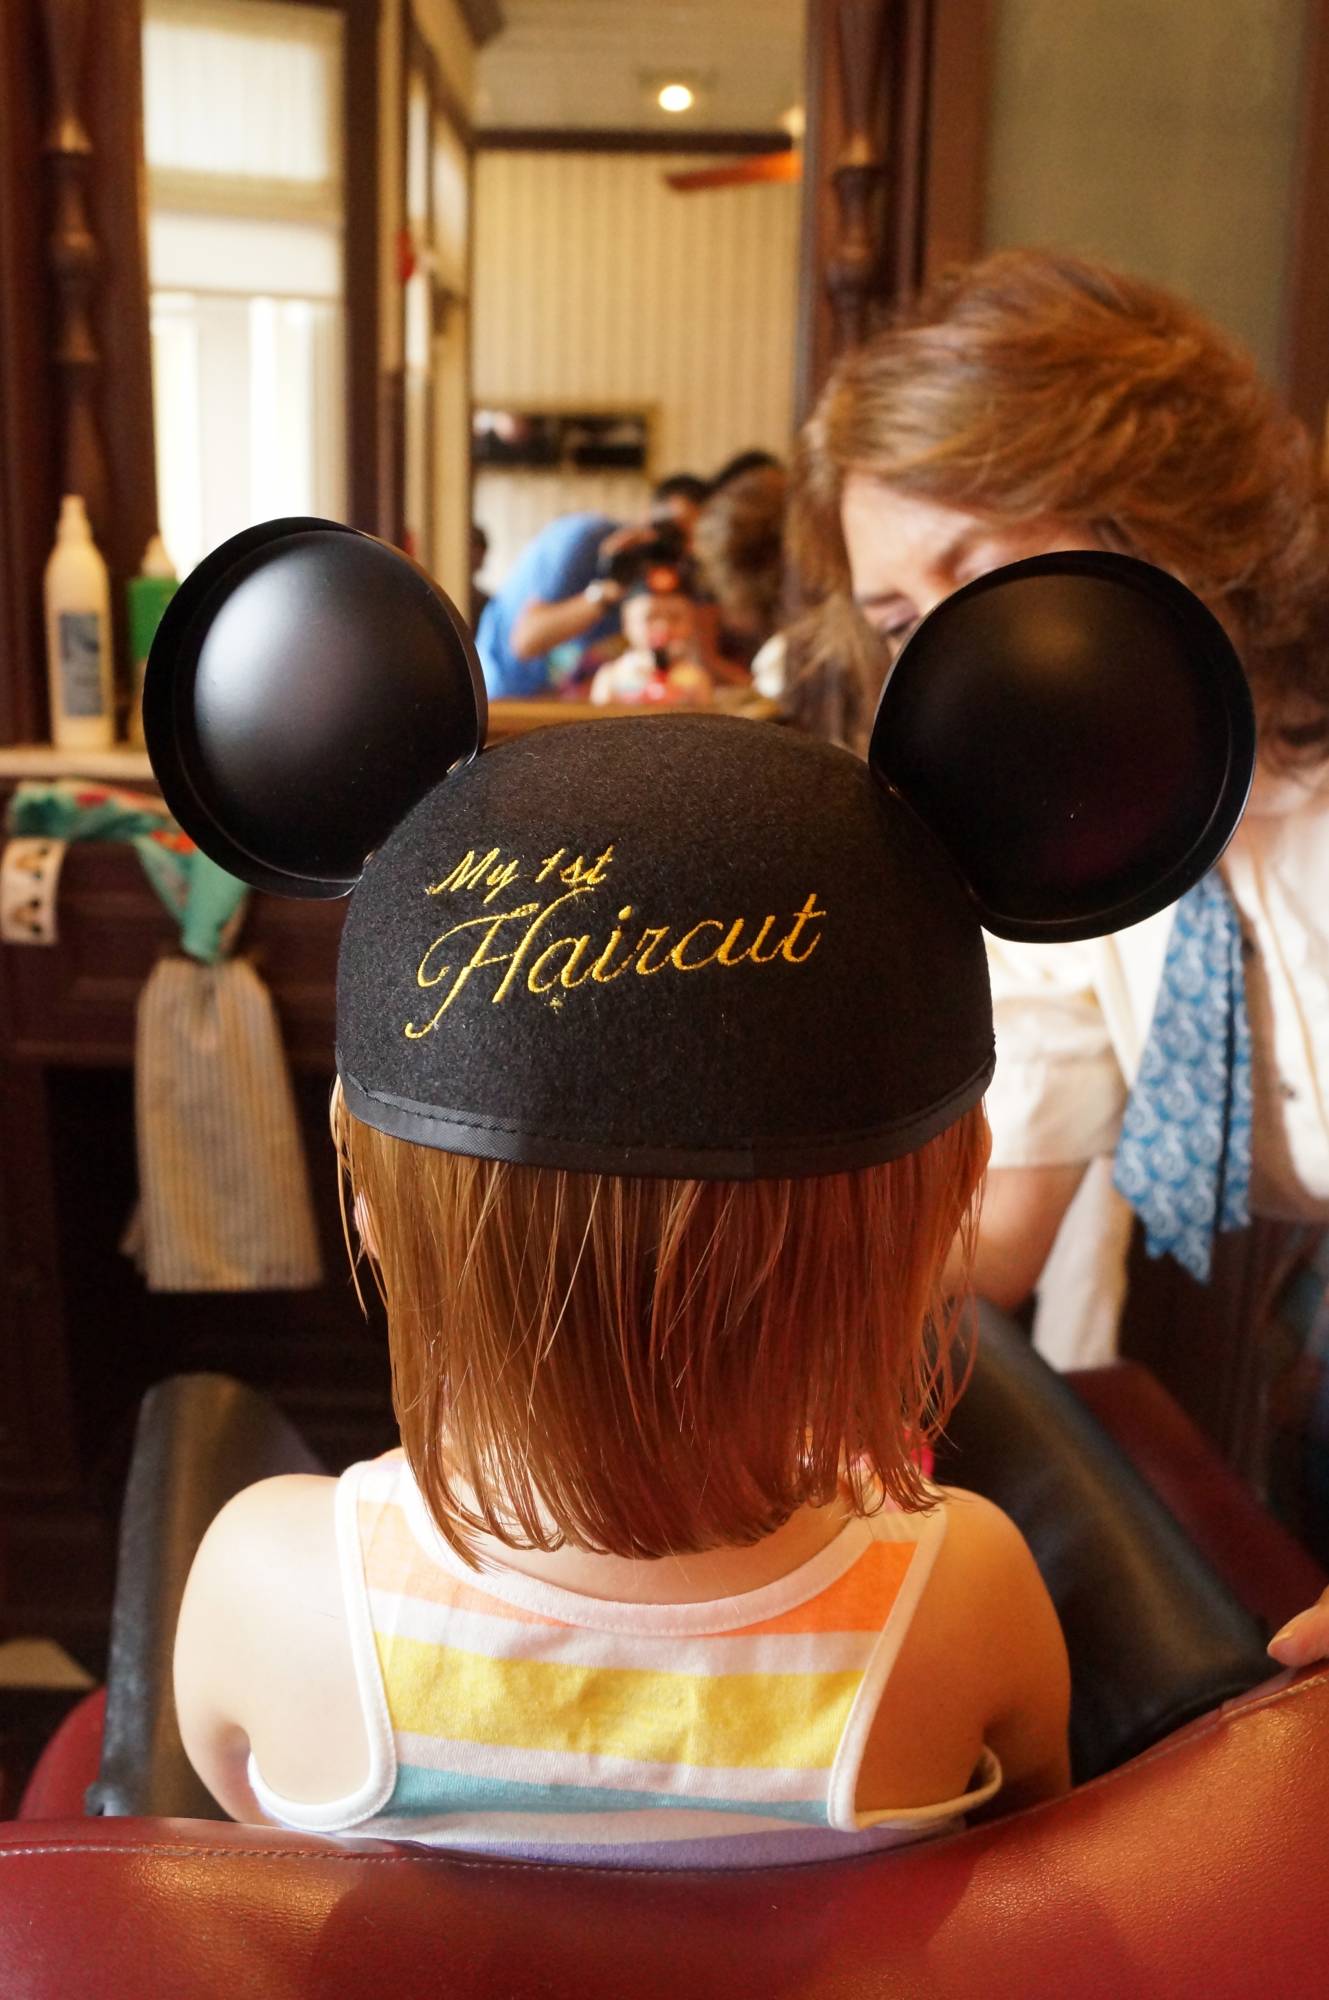 Little ones can get their first haircut at the Harmony Barber Shop in the Magic Kingdom |PassPorter.com